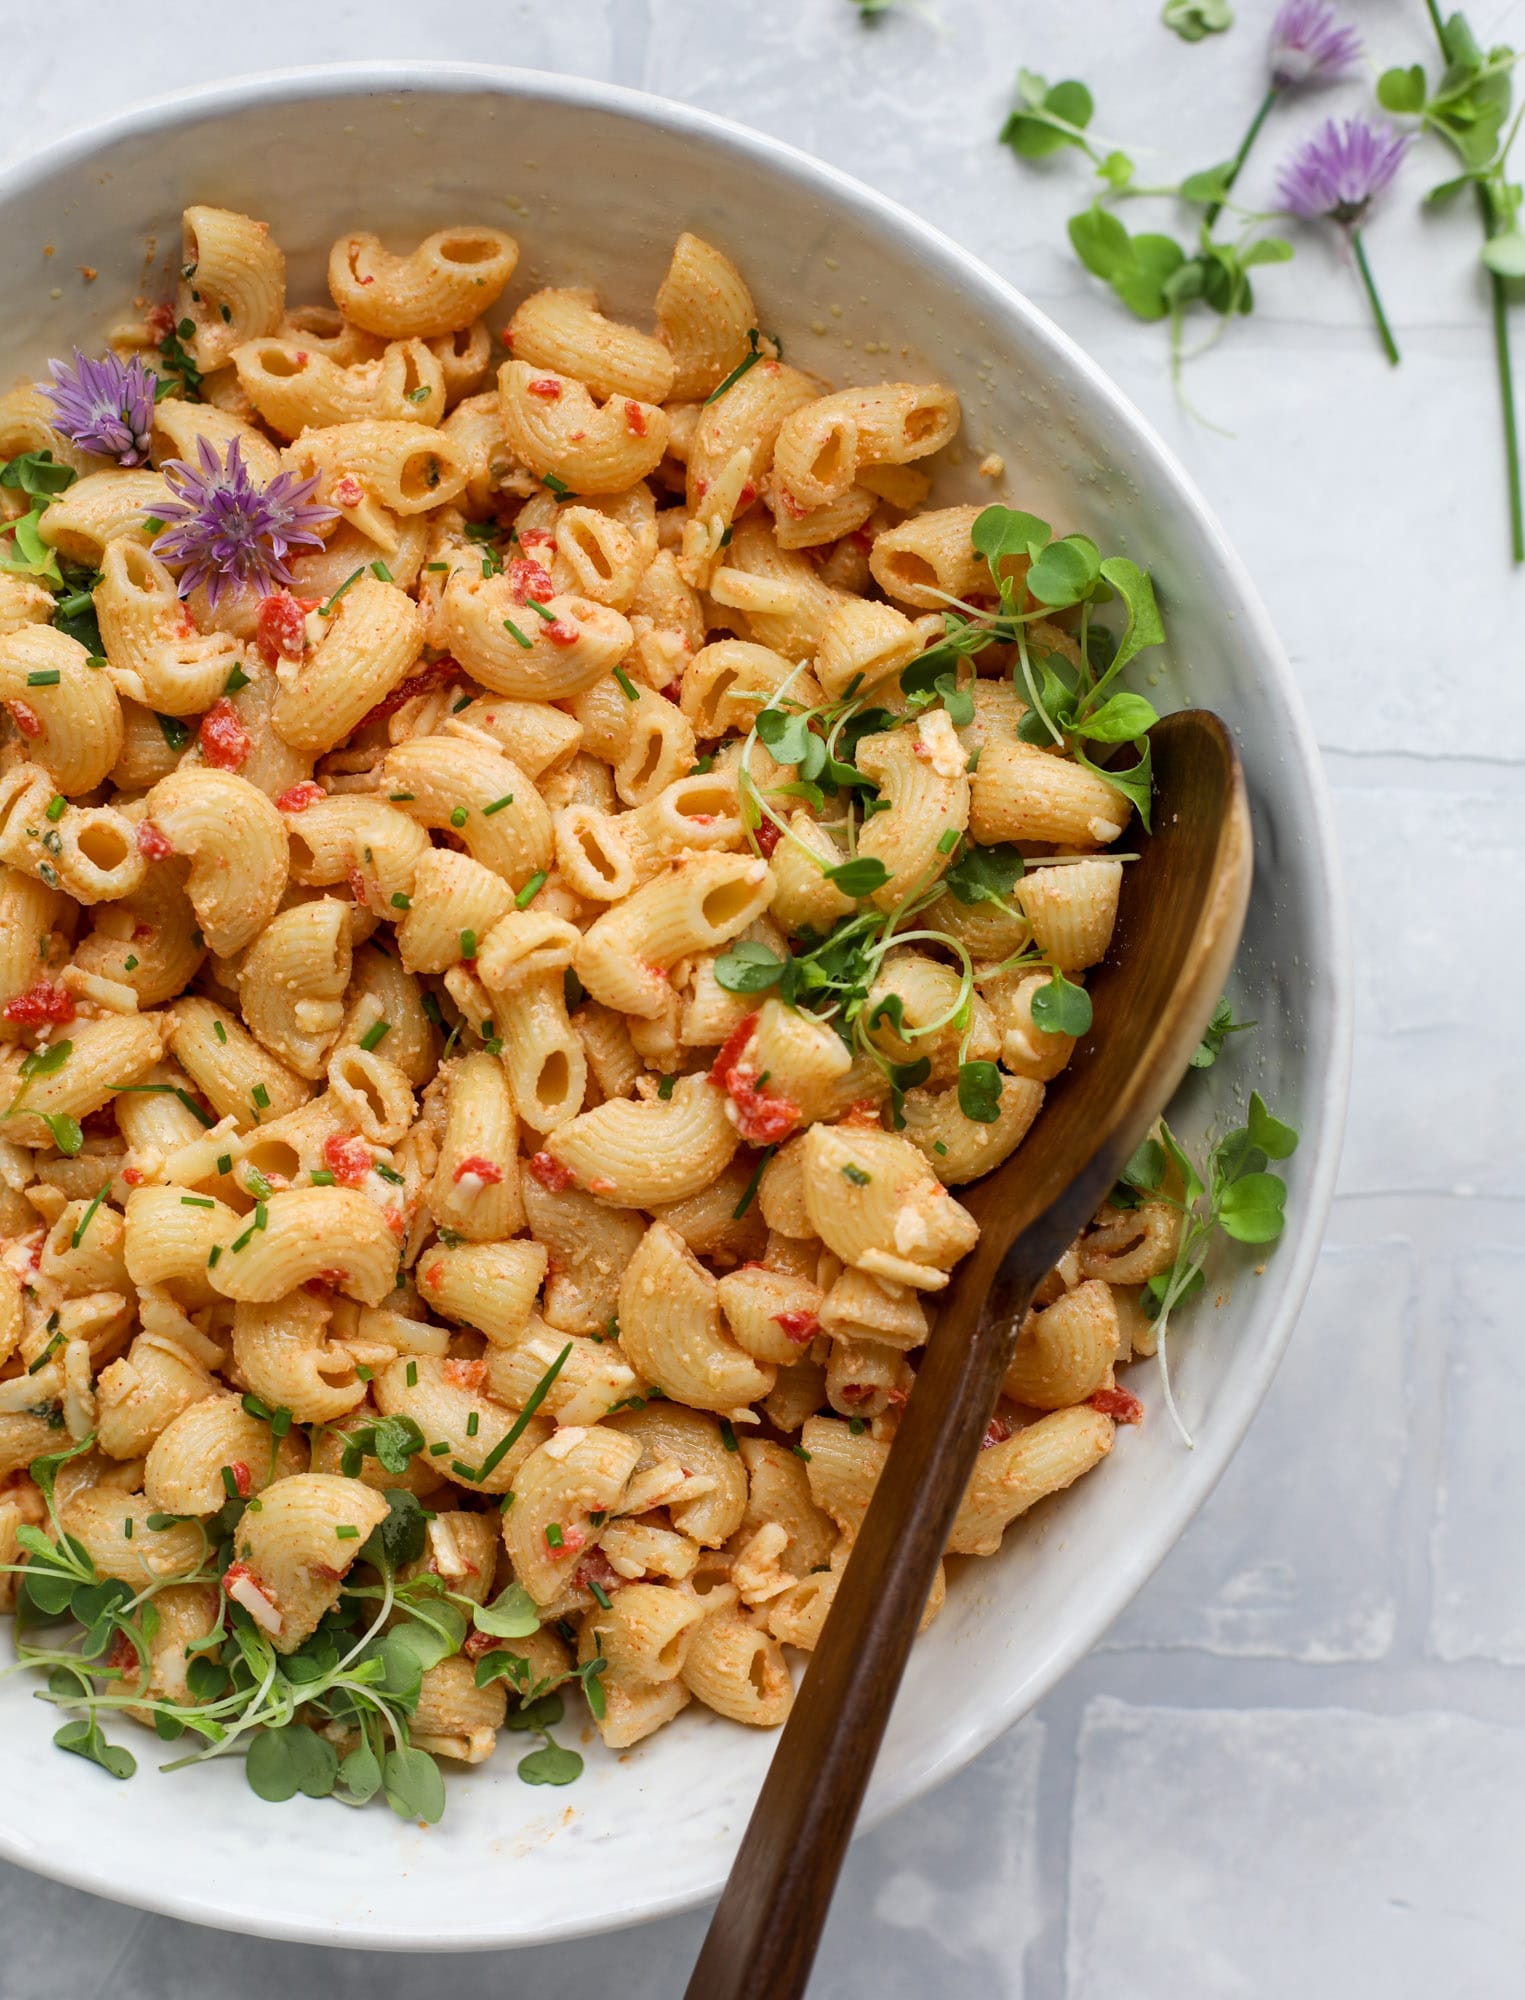 This pimento cheese pasta salad is the perfect summer side dish! All the flavor of pimento cheese and all the comforts of pasta salad, in one bowl!